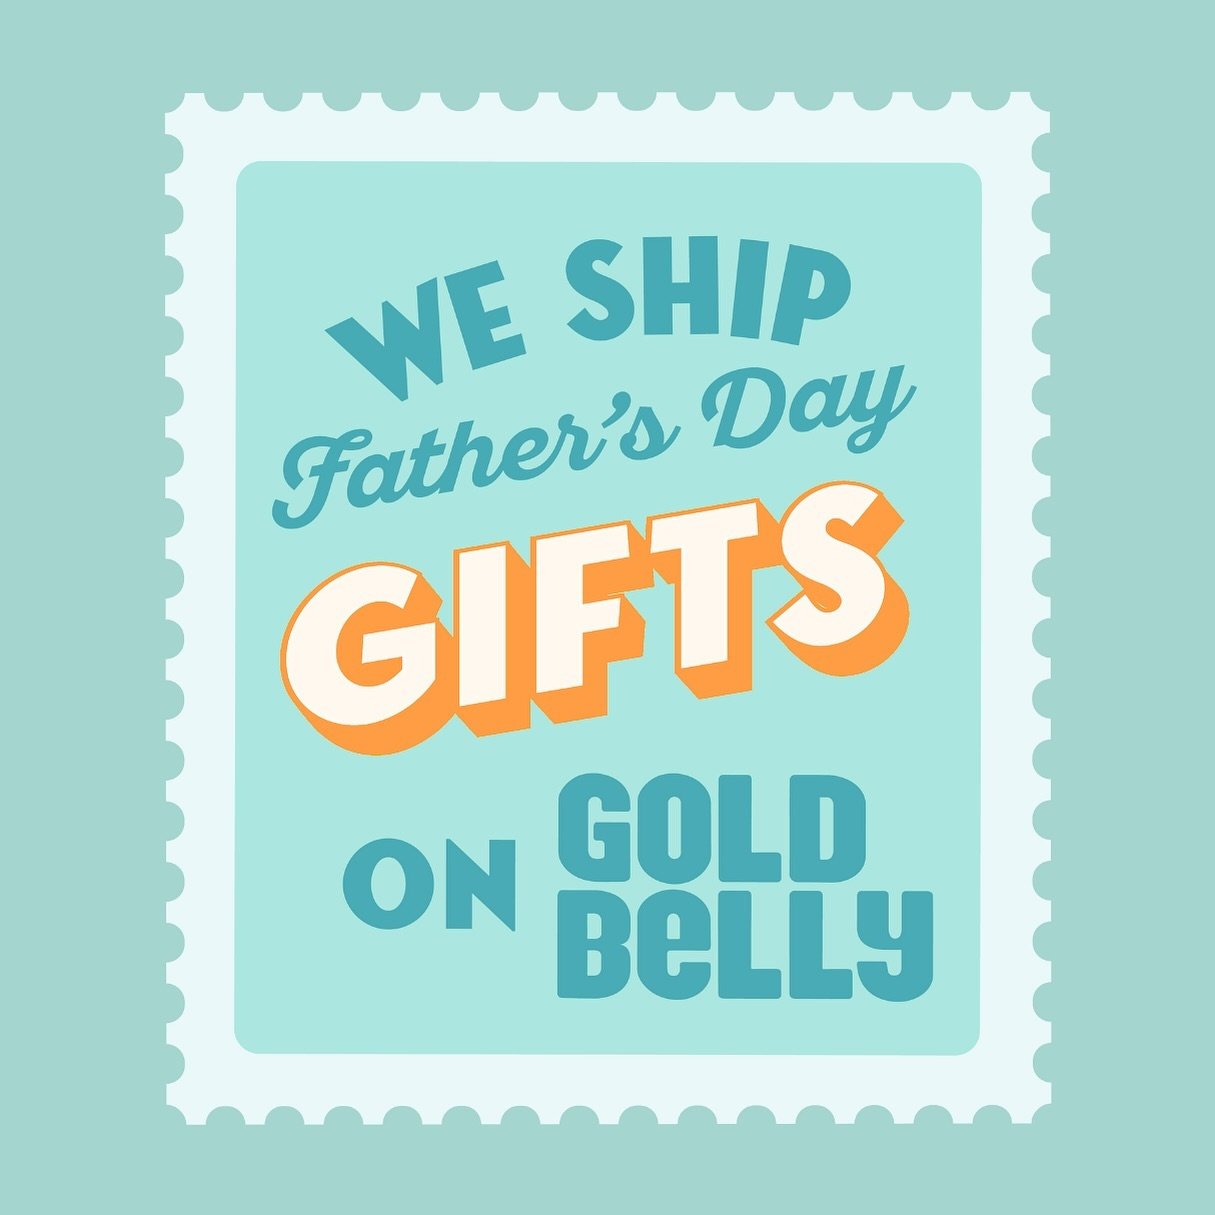 Give dad what he really wants for Father&rsquo;s Day this year! Send dad his favorite Southern comfort foods from Puckett&rsquo;s straight to his door with @goldbelly 🙌⁣
⁣⁣
⁣Click the link in our bio to order now! 🚚📦🔥⁣
⁣⁣
⁣#Goldbelly #PuckettsRes